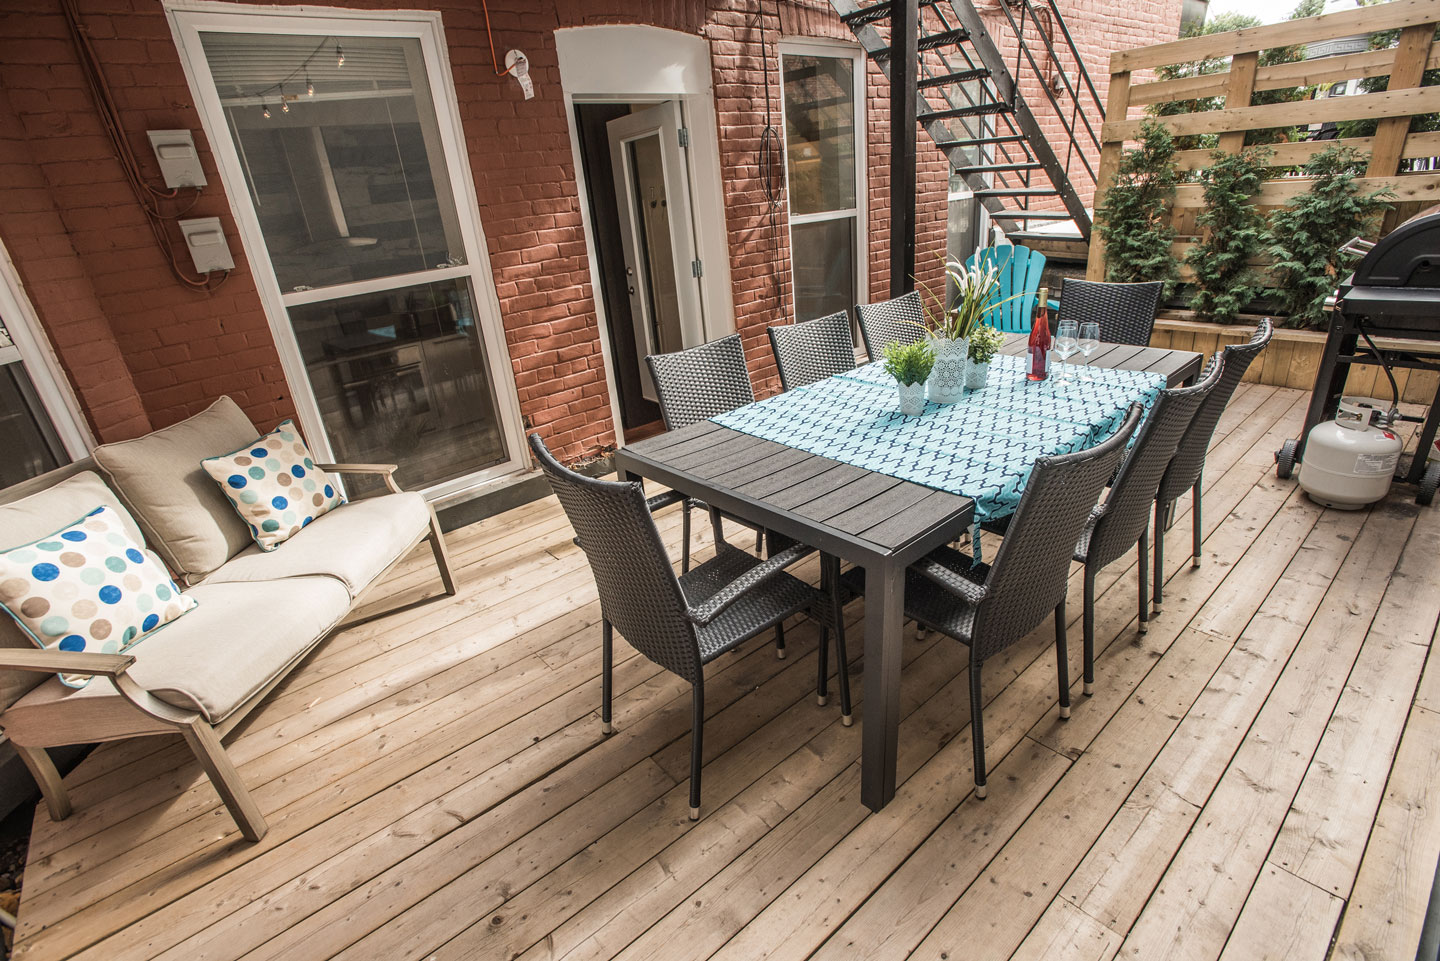 Fabfour: sunny patio with furniture and BBQ with gas provided